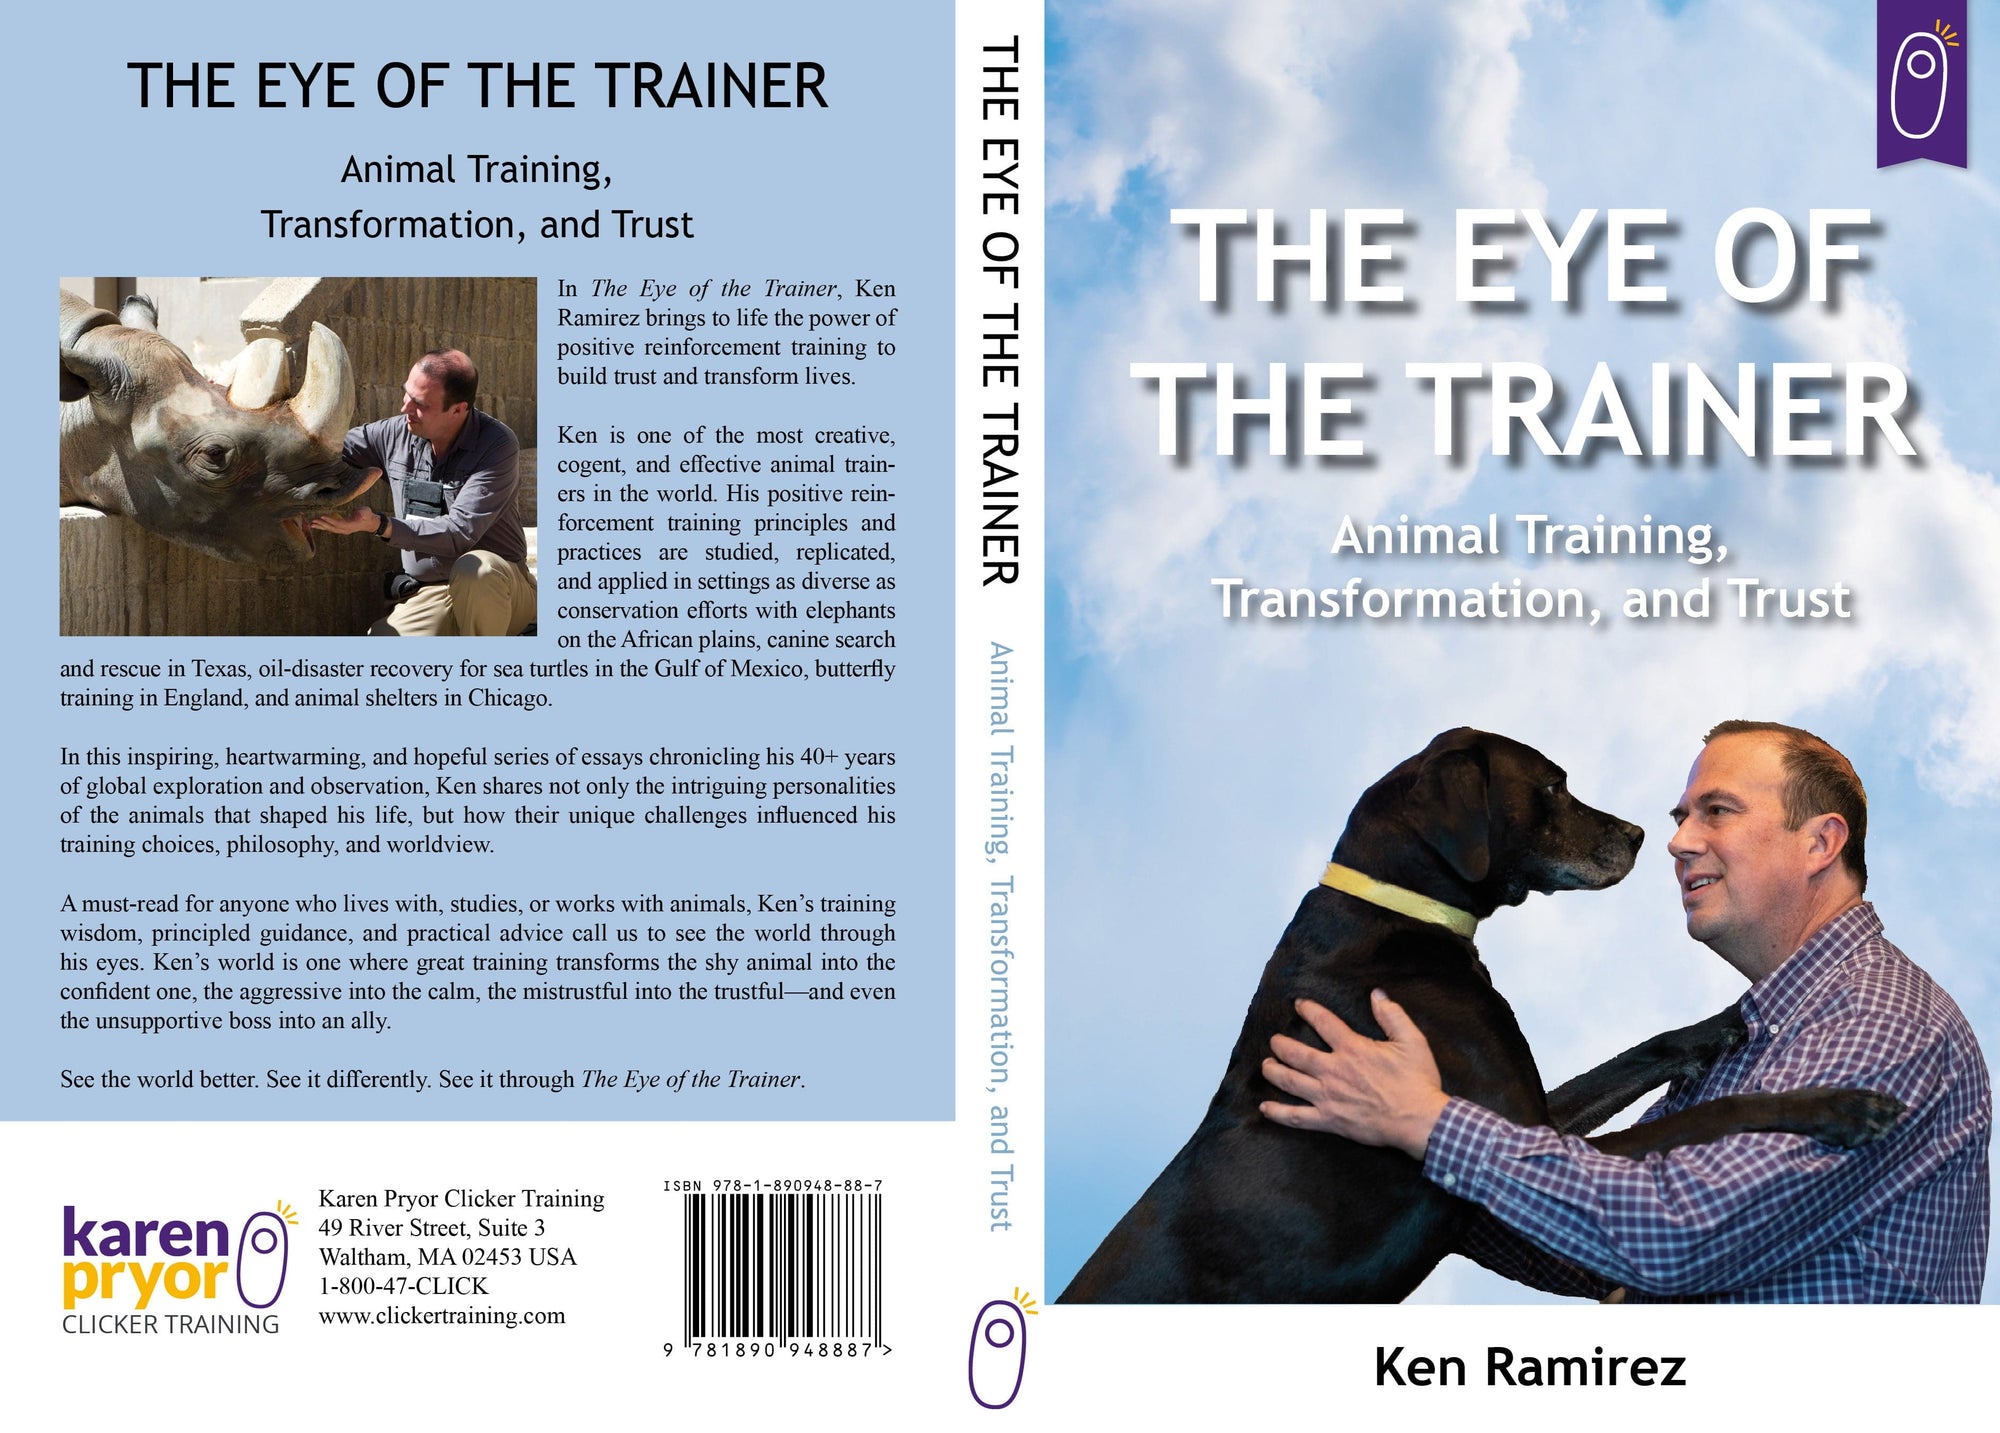 The Eye of the Trainer: Animal Training, Transformation, and Trust by Ken Ramirez